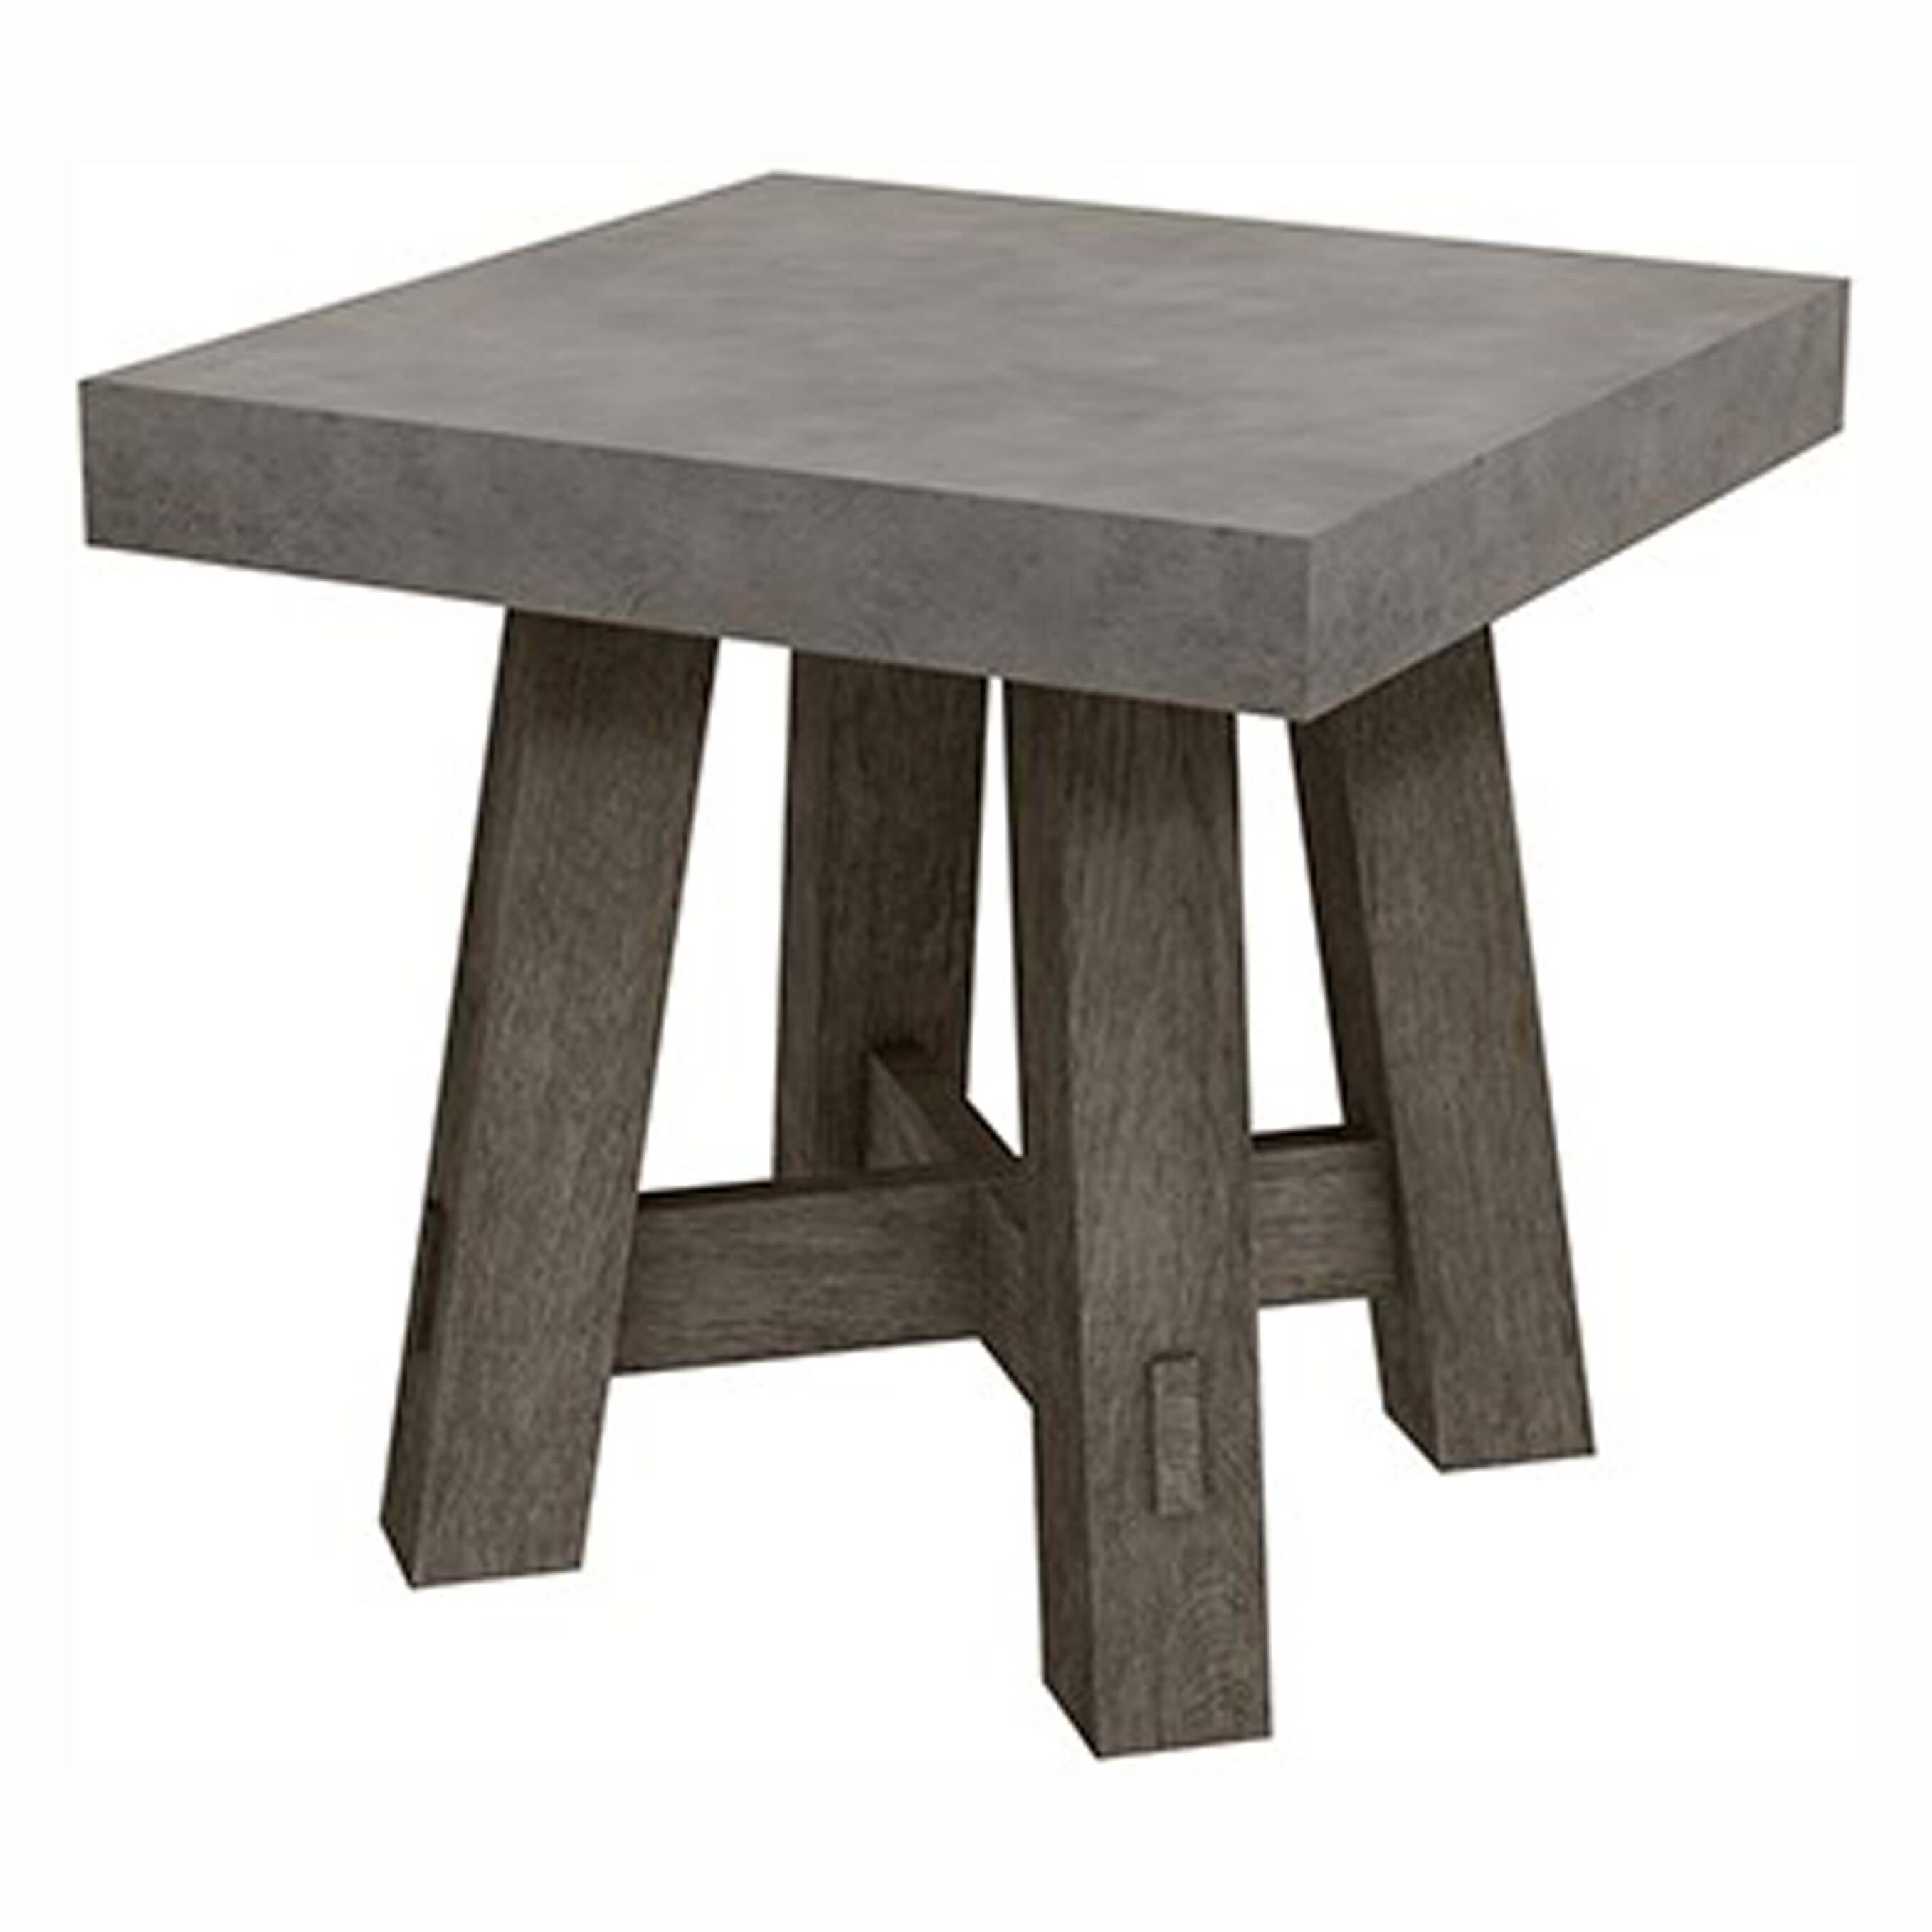 Amherst Square End Table - Smoke